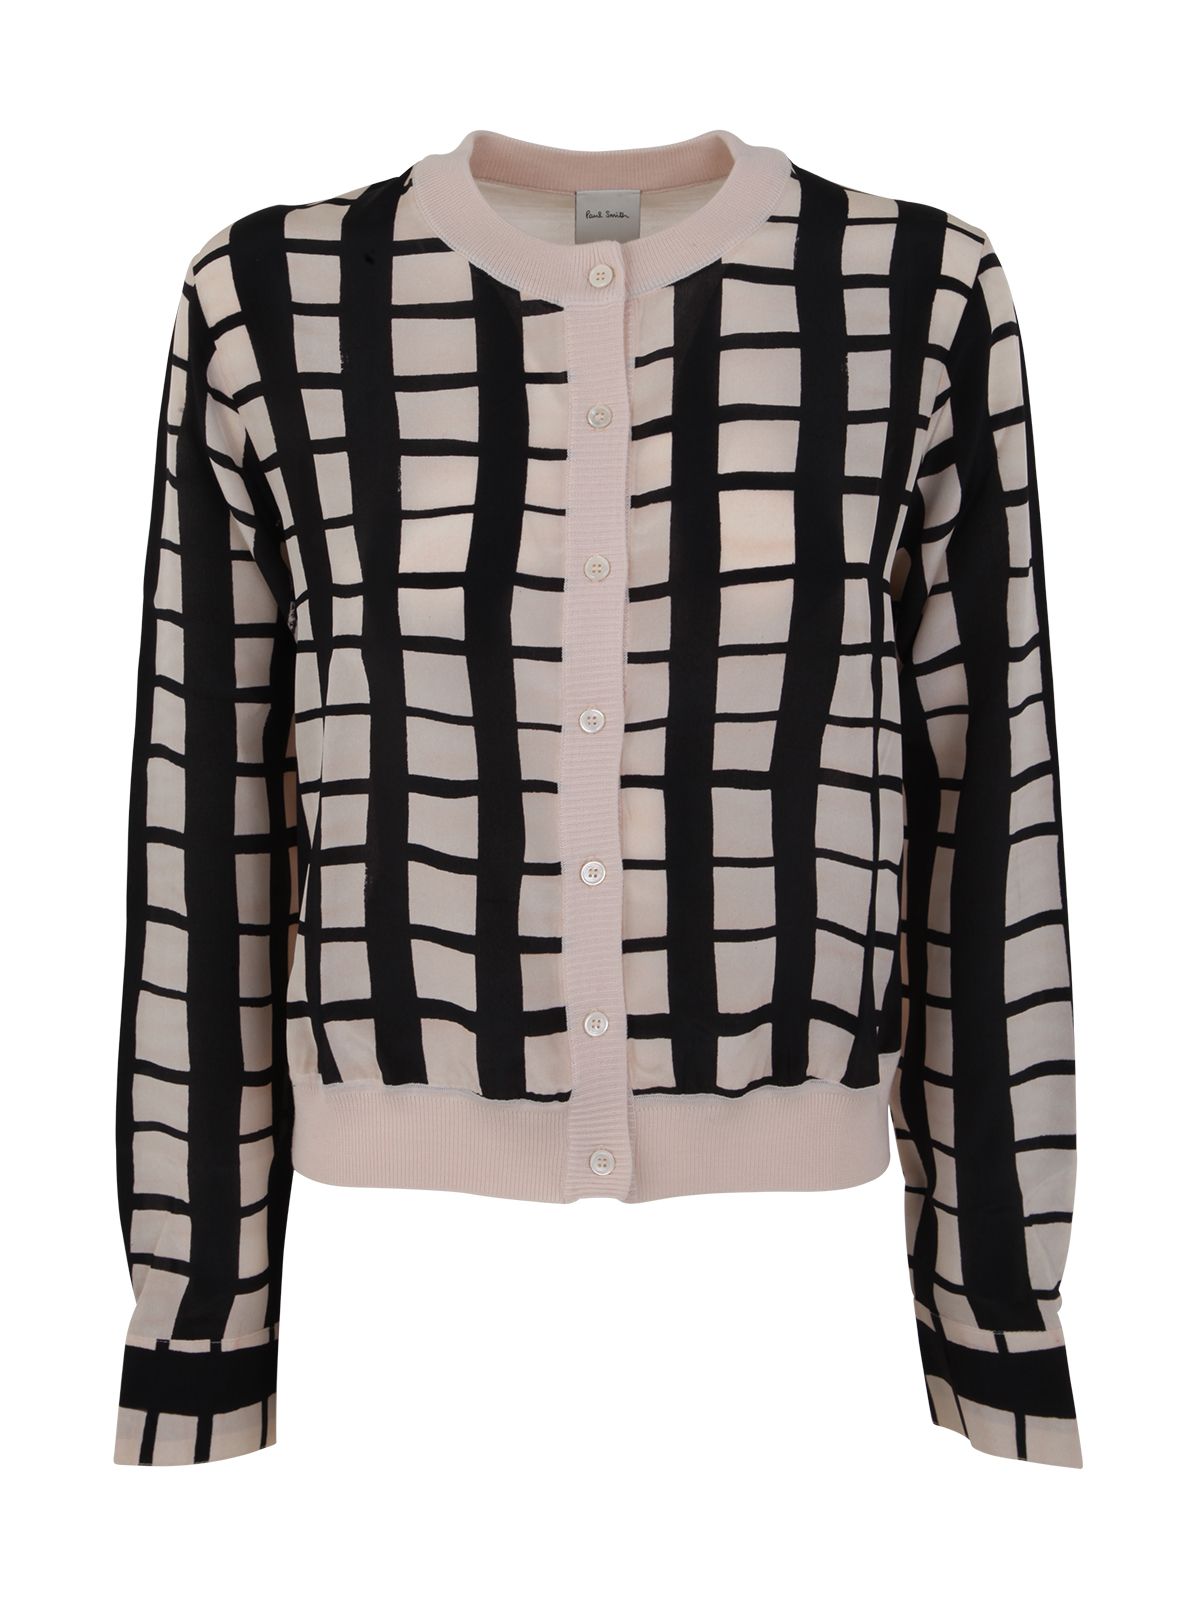 Paul Smith Bicolor Cardigan, Solid Colour On The Back And With Checkered Pattern On The Back In White